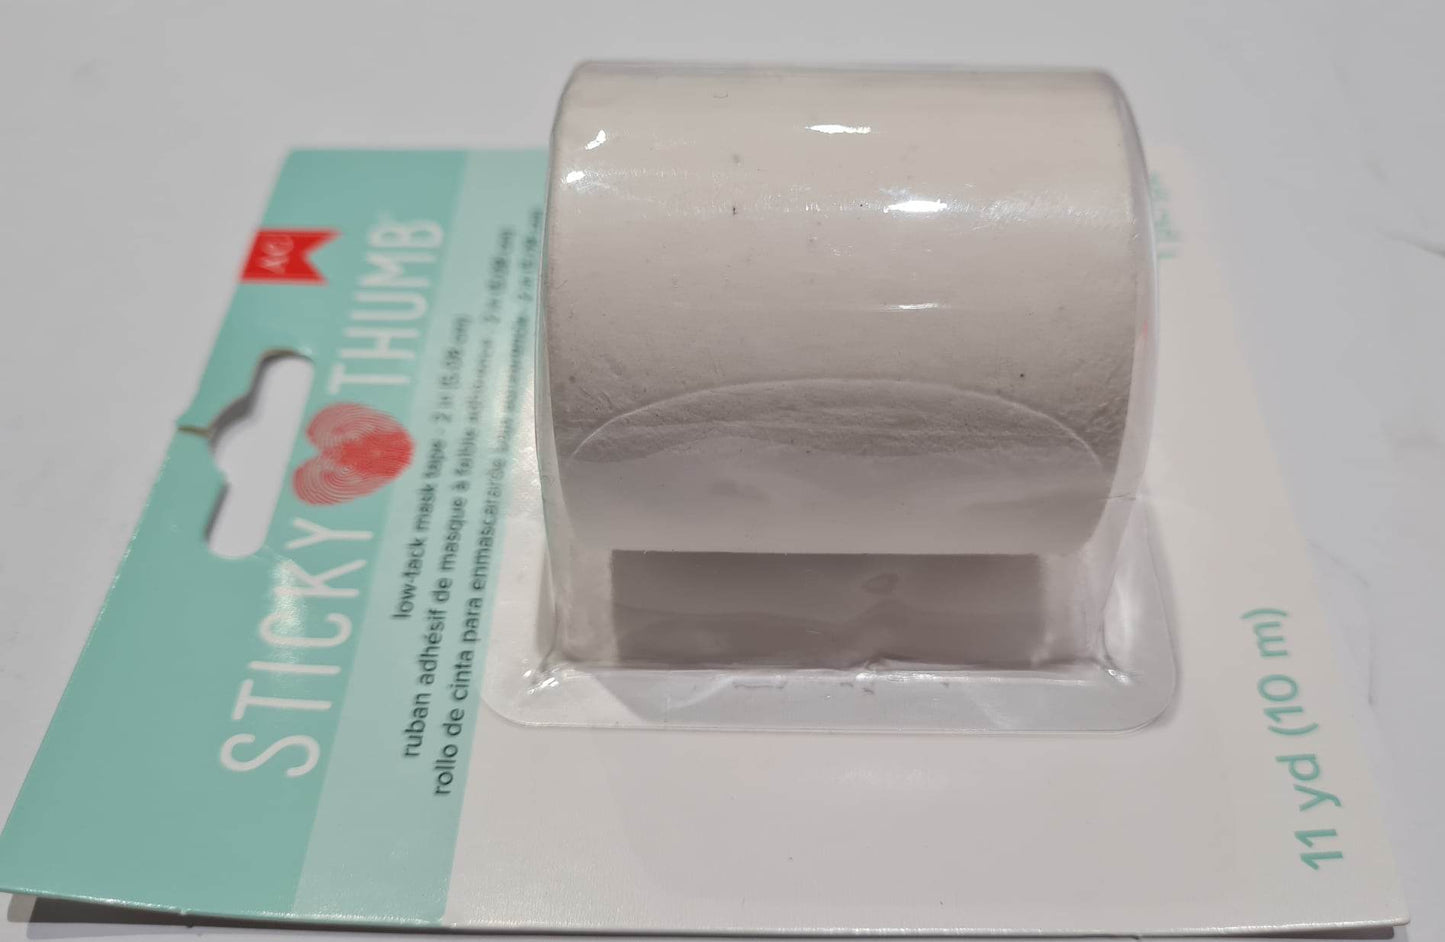 Sticky Thumb - Low Tack Masking Tape 2inch